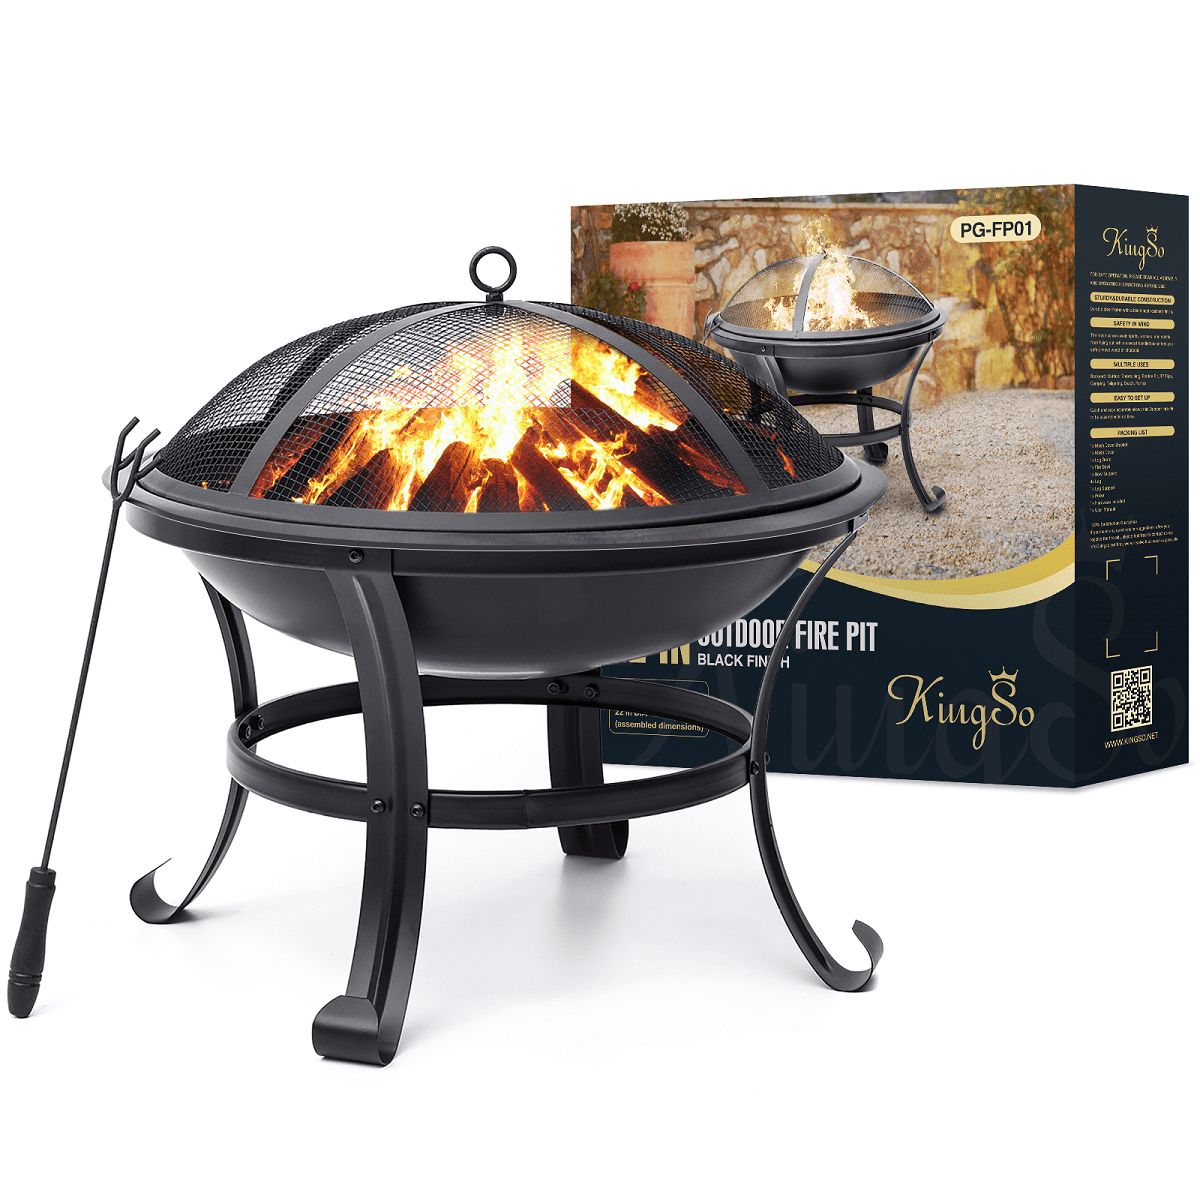 Kingso 22 Wood Burning Fire Pit For, 4 Foot Fire Pit Screen